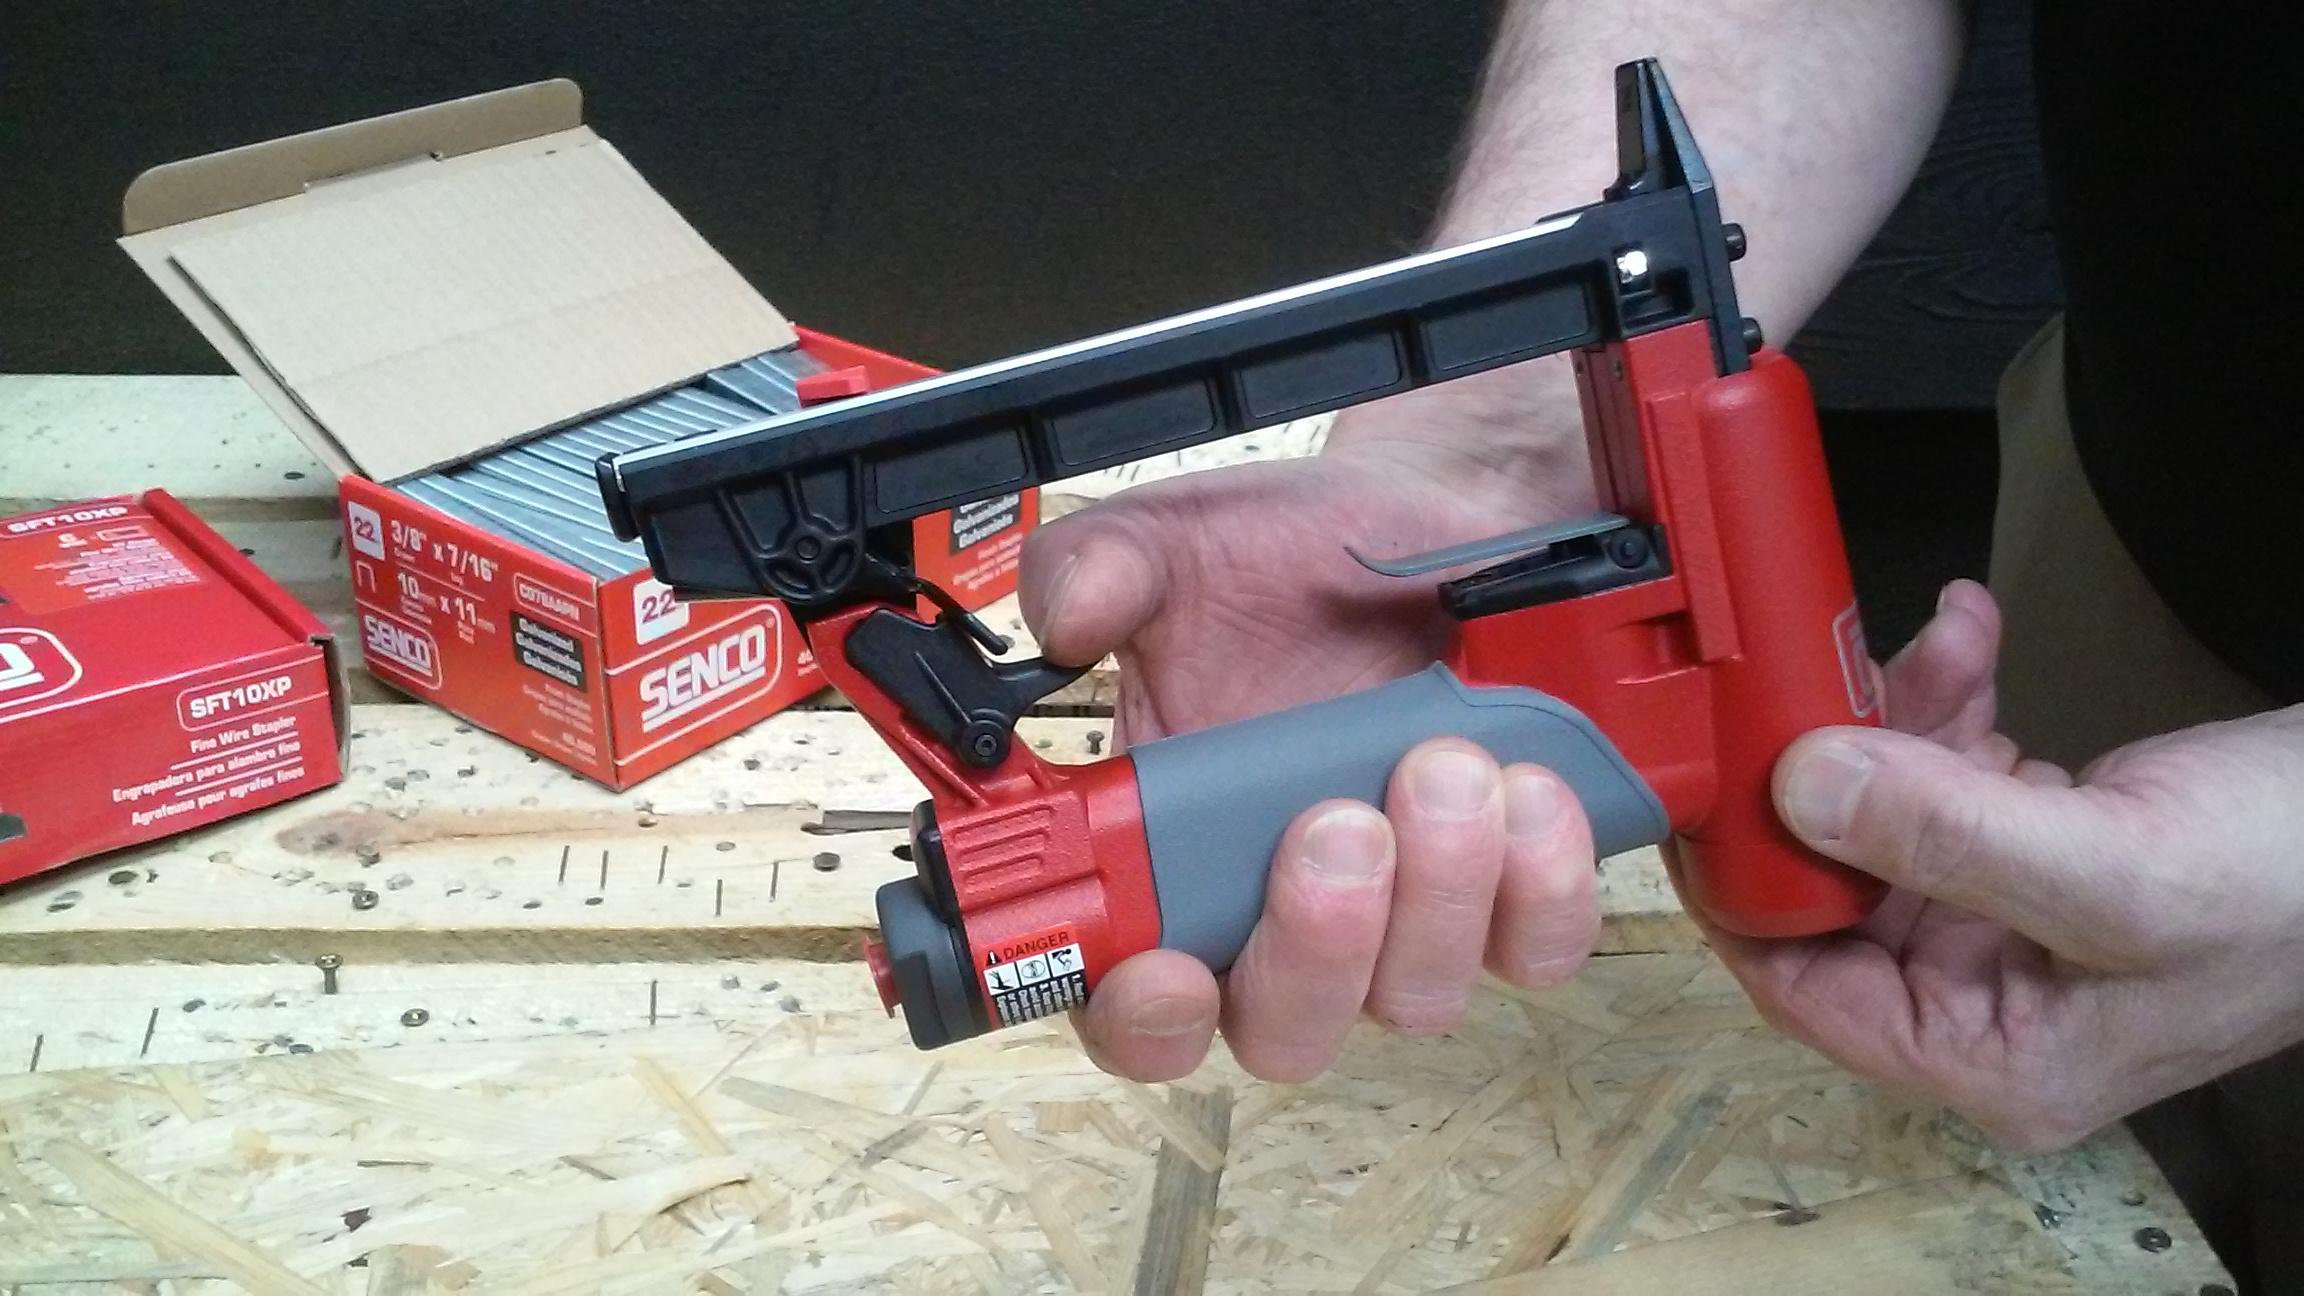 How to load bottom feed staple gun step 1